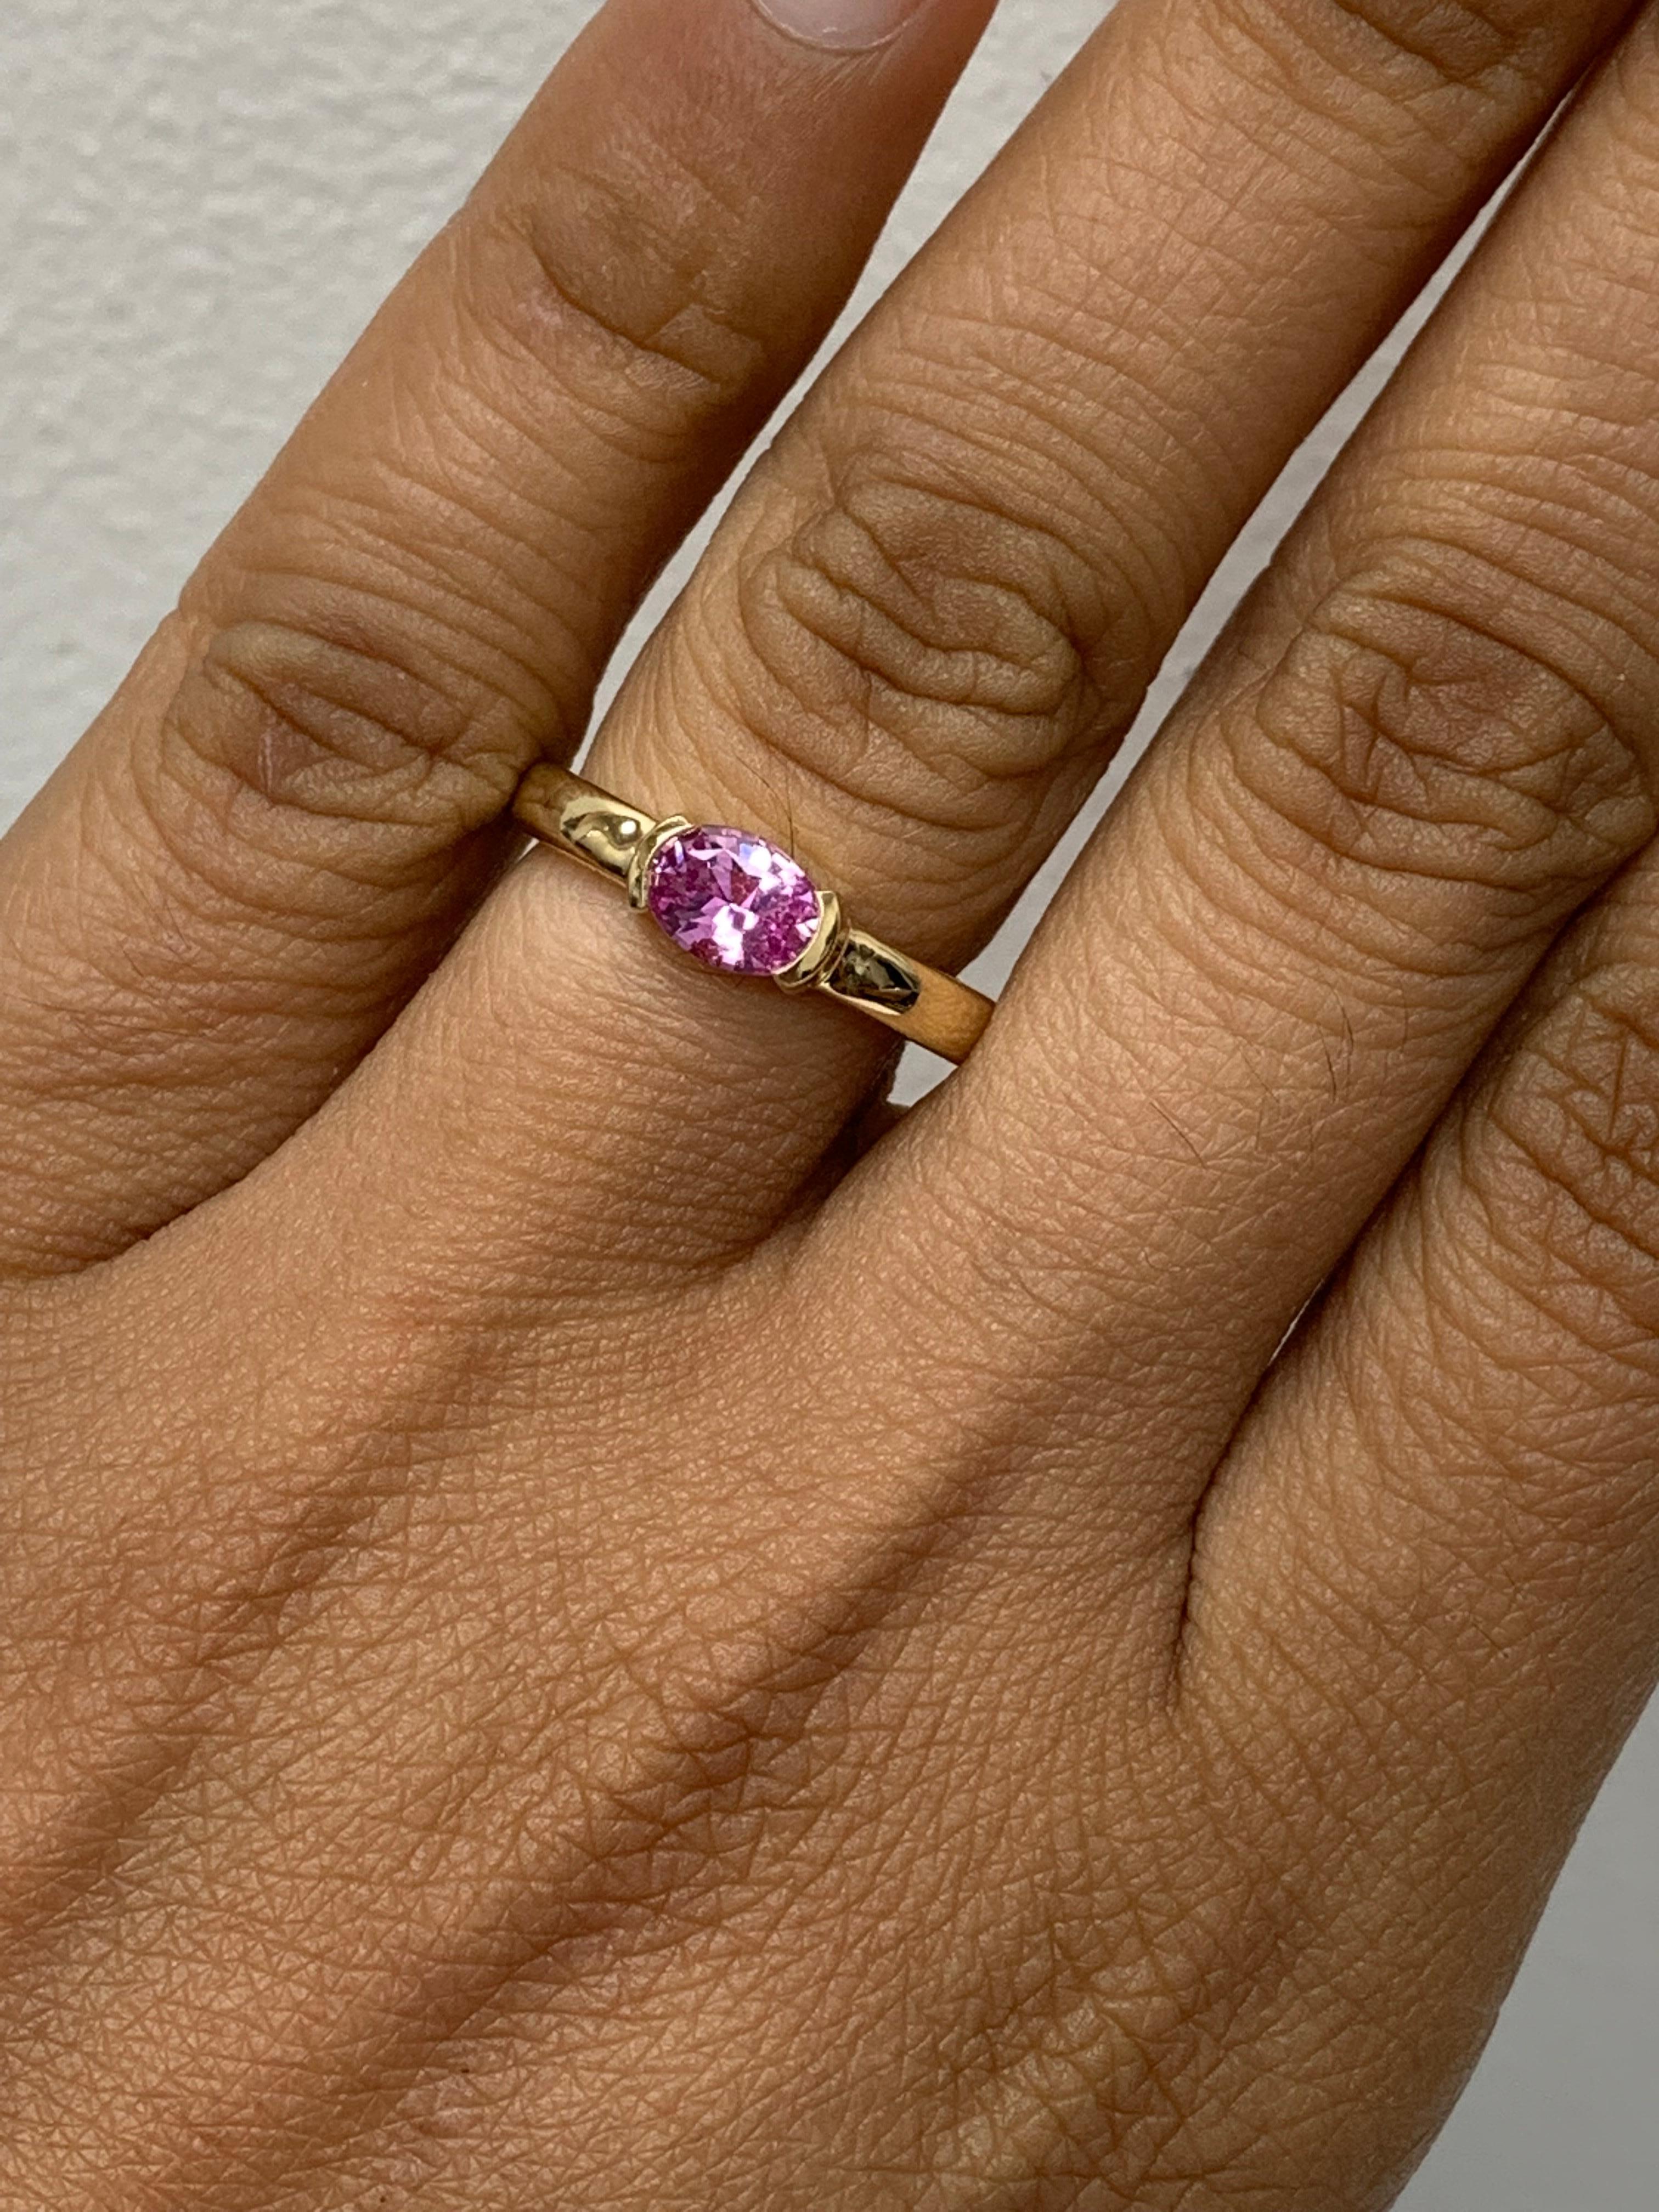 0.73 Carat Oval Cut Pink Sapphire Band Ring in 14K Yellow Gold For Sale 2